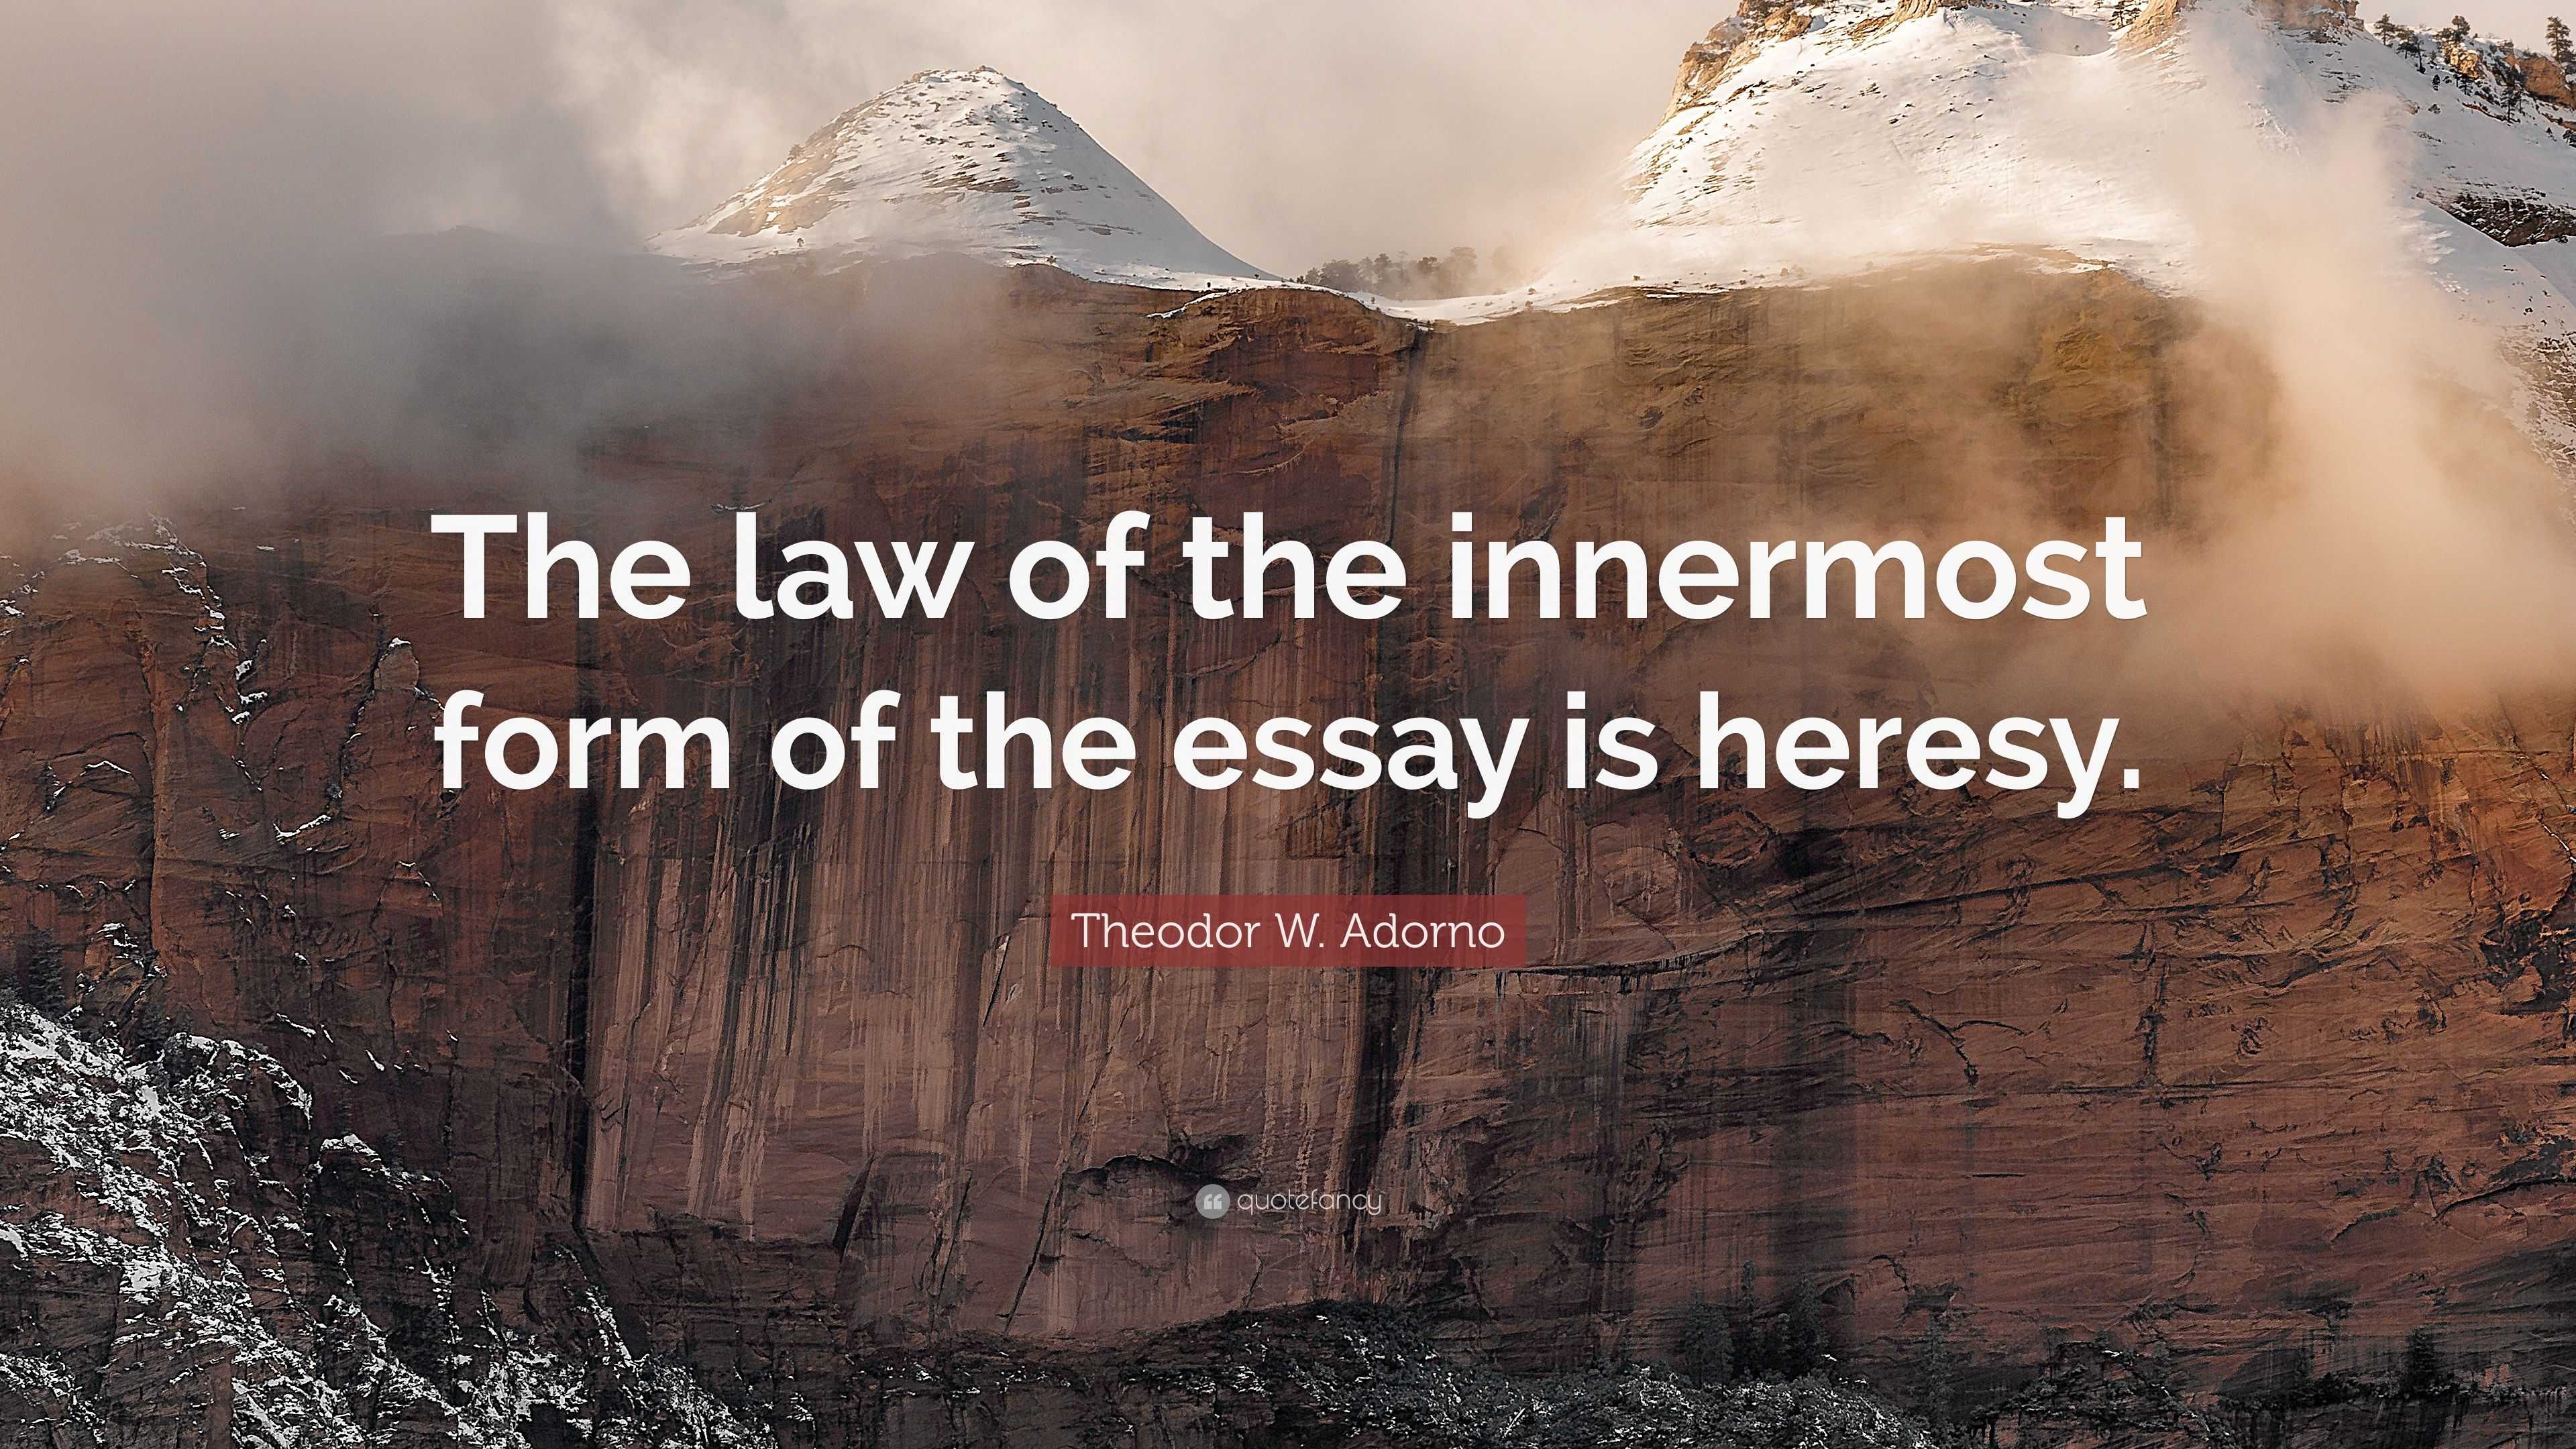 theodor-w-adorno-quote-the-law-of-the-innermost-form-of-the-essay-is